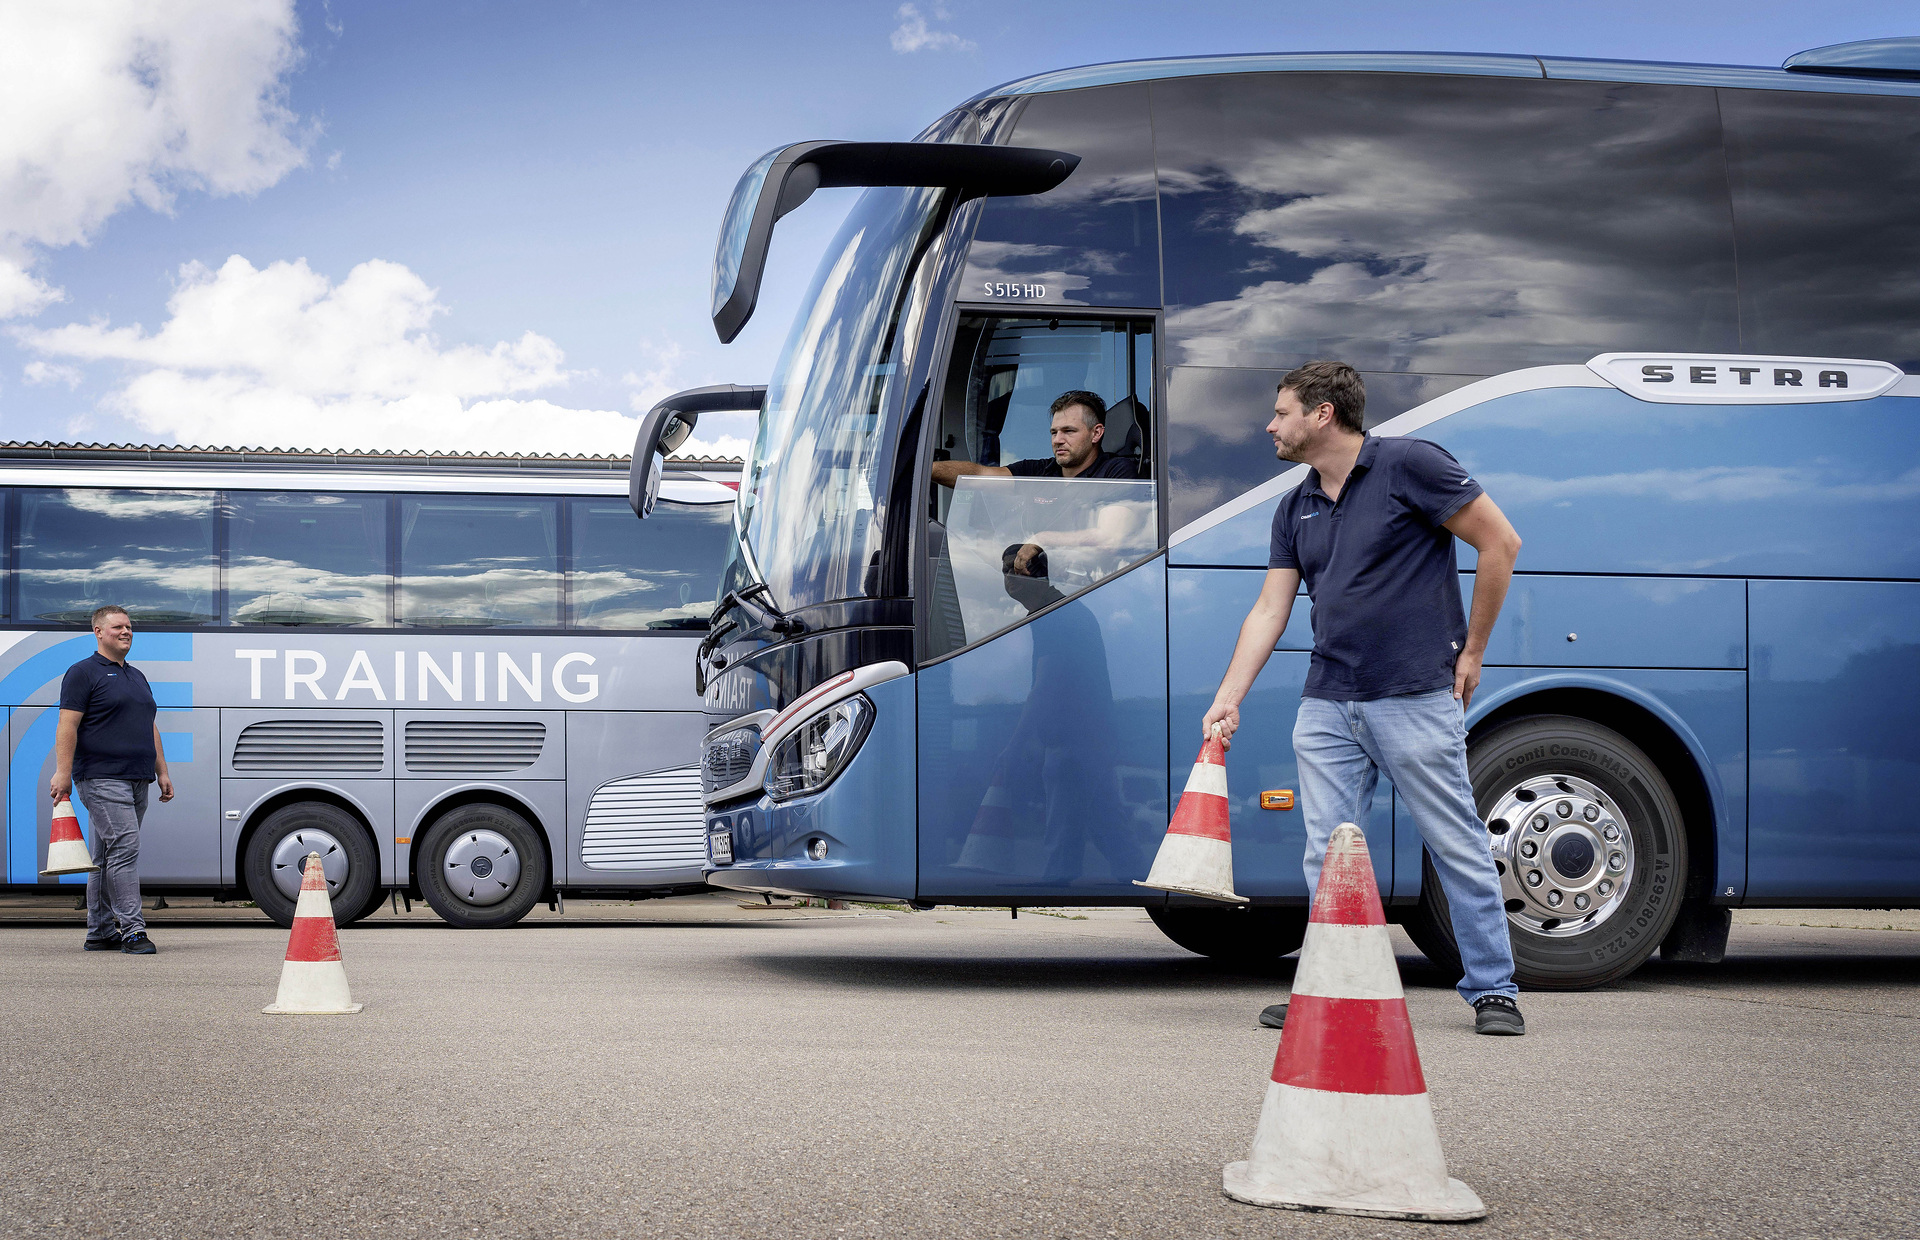 30 years, 20,000 trained drivers, one objective: Preventing accidents with targeted bus/touring coach driver safety training